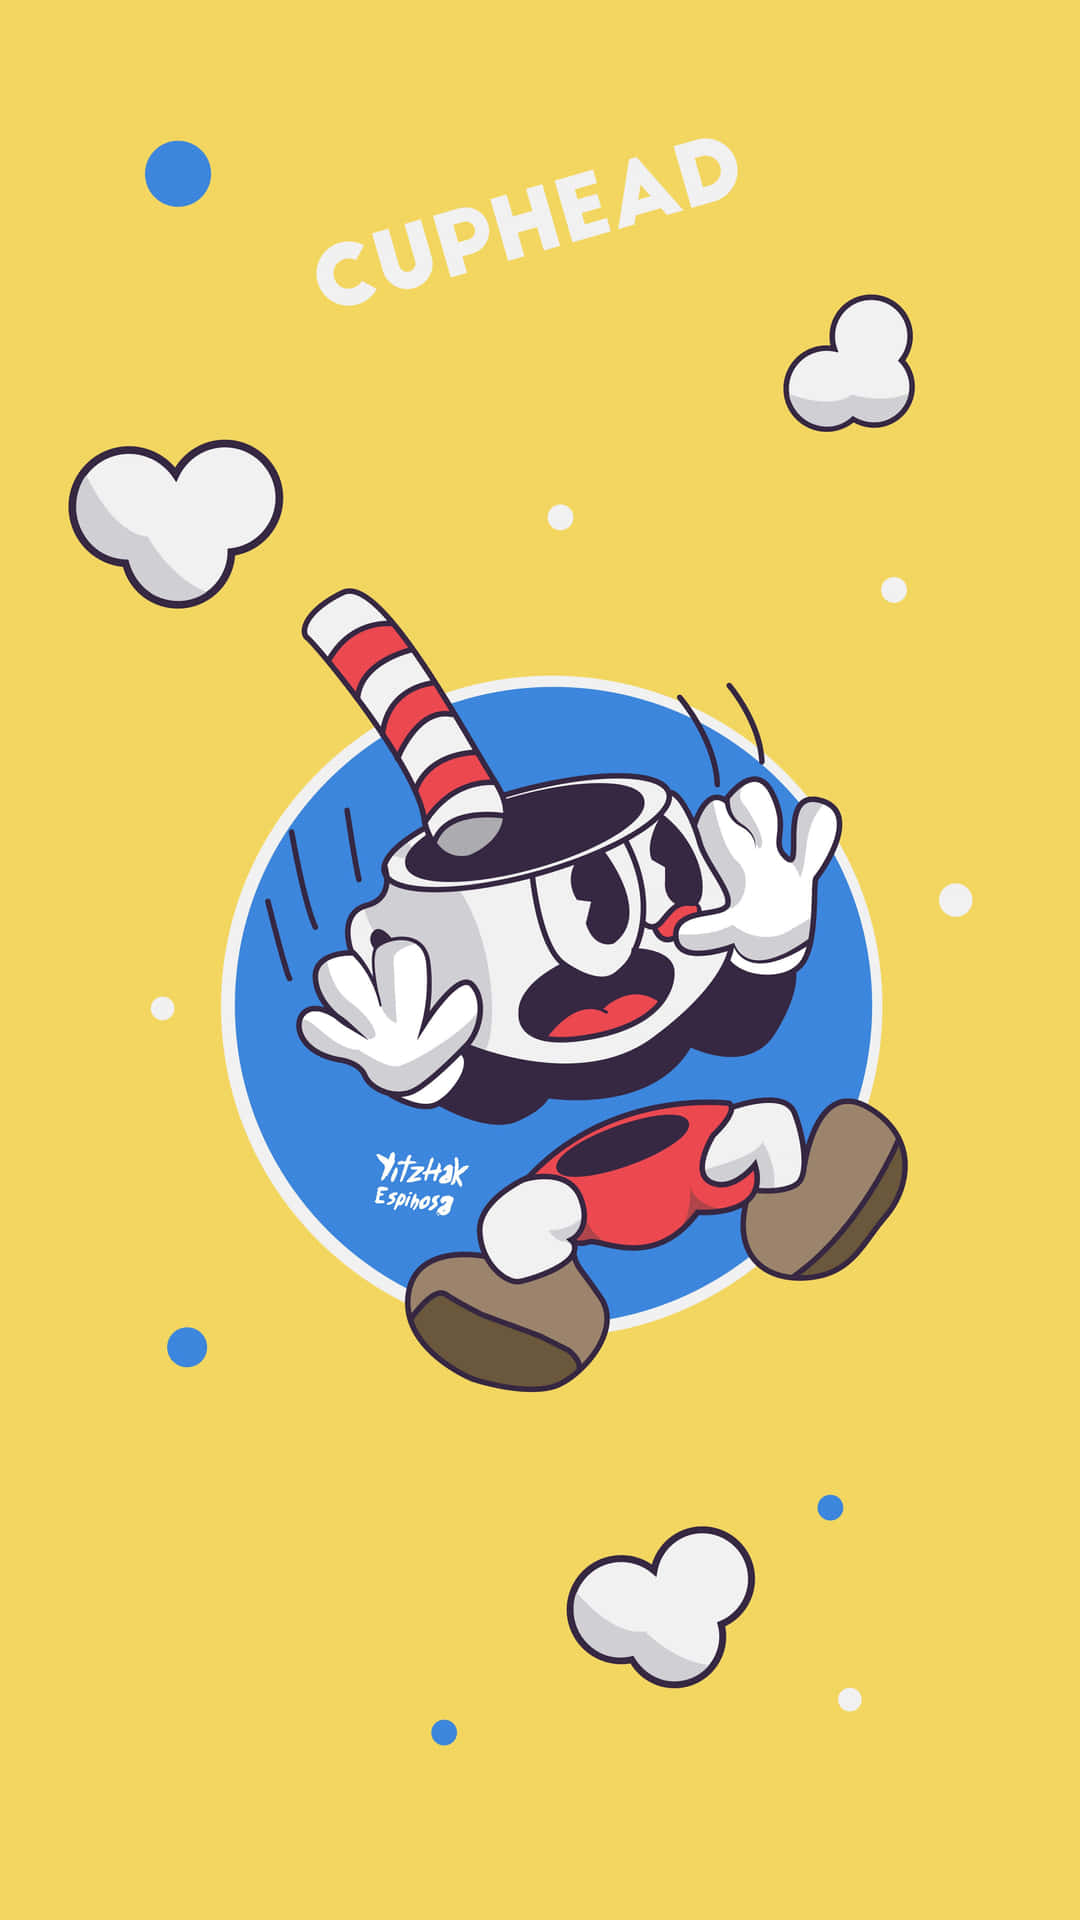 Step into the world of Cuphead